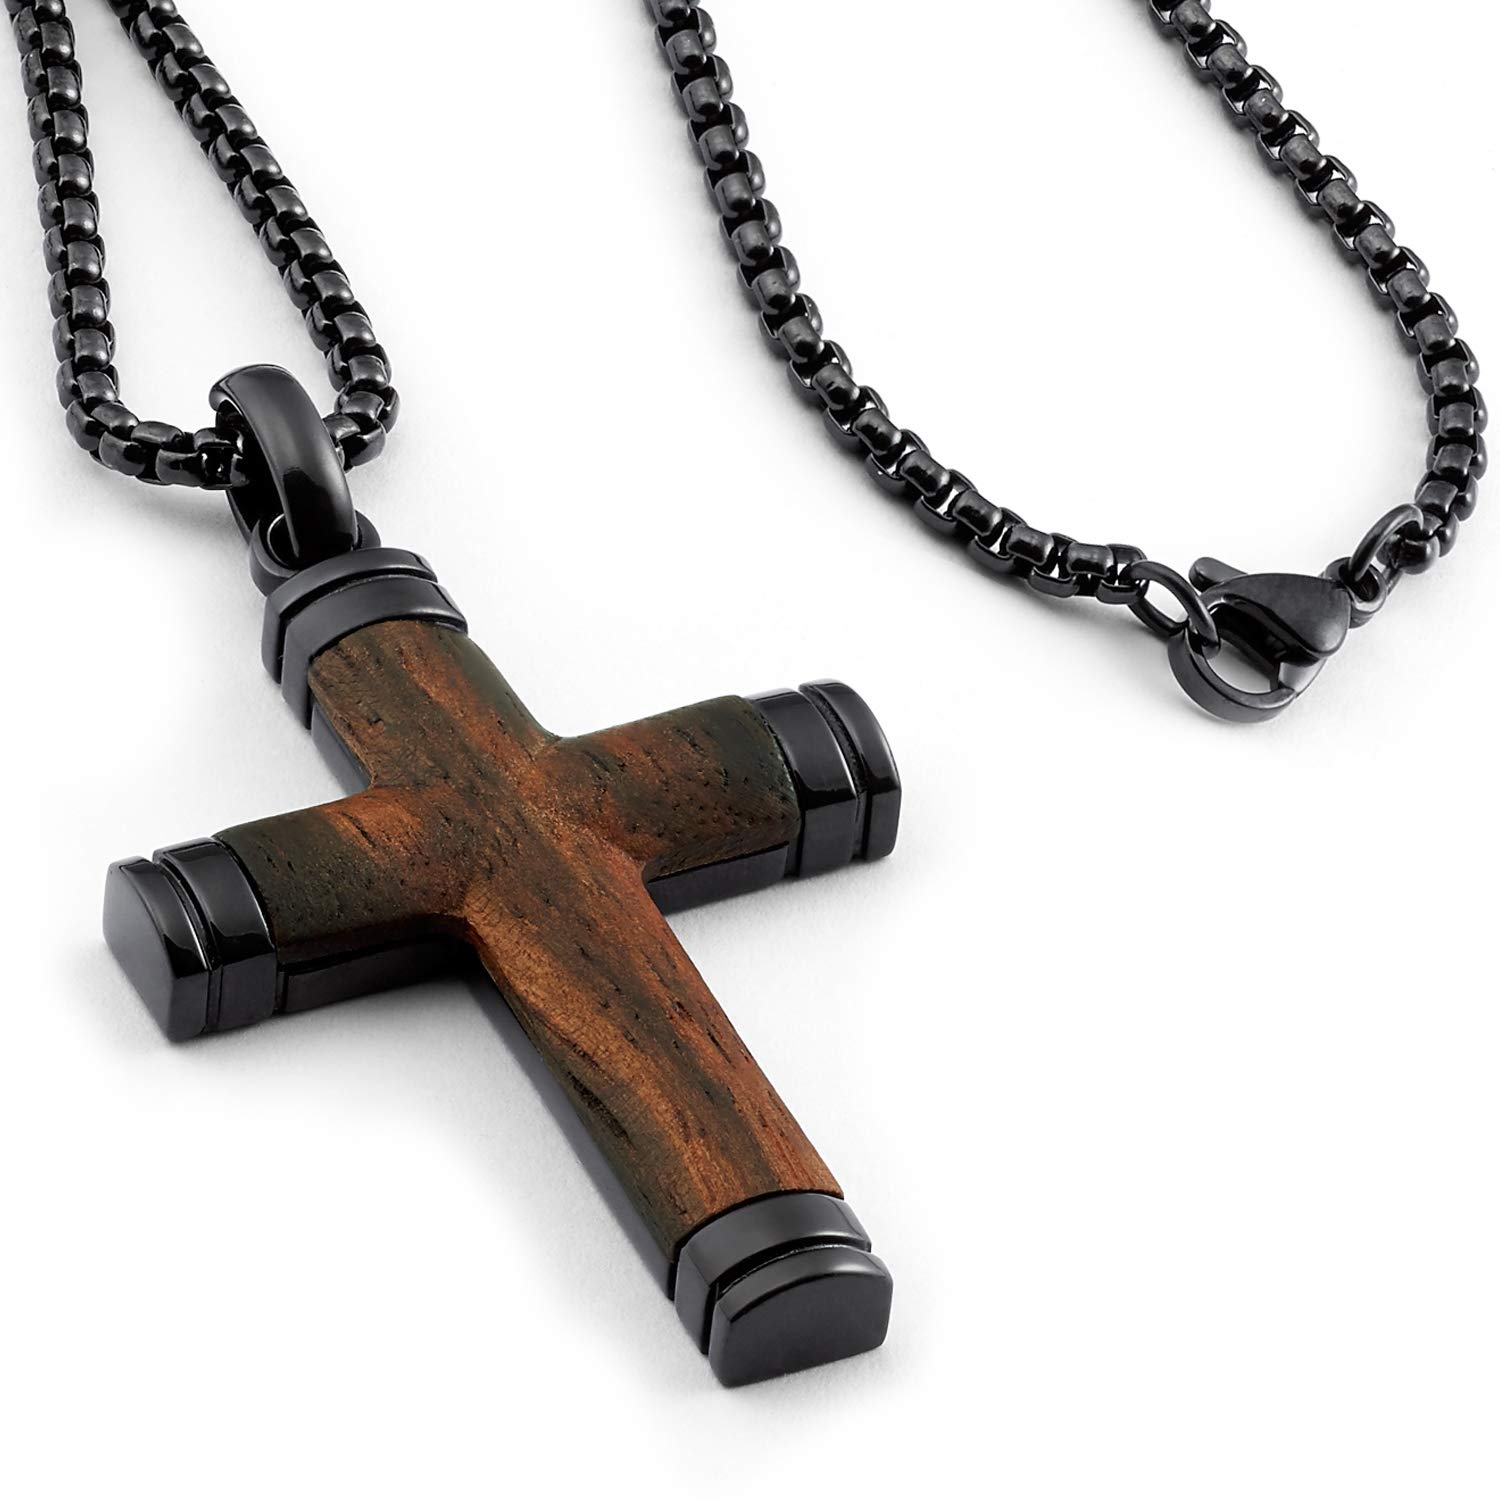 Metal Masters Co. Black Stainless Steel Cross Pendant, Real Santos Wood Free Necklace 24